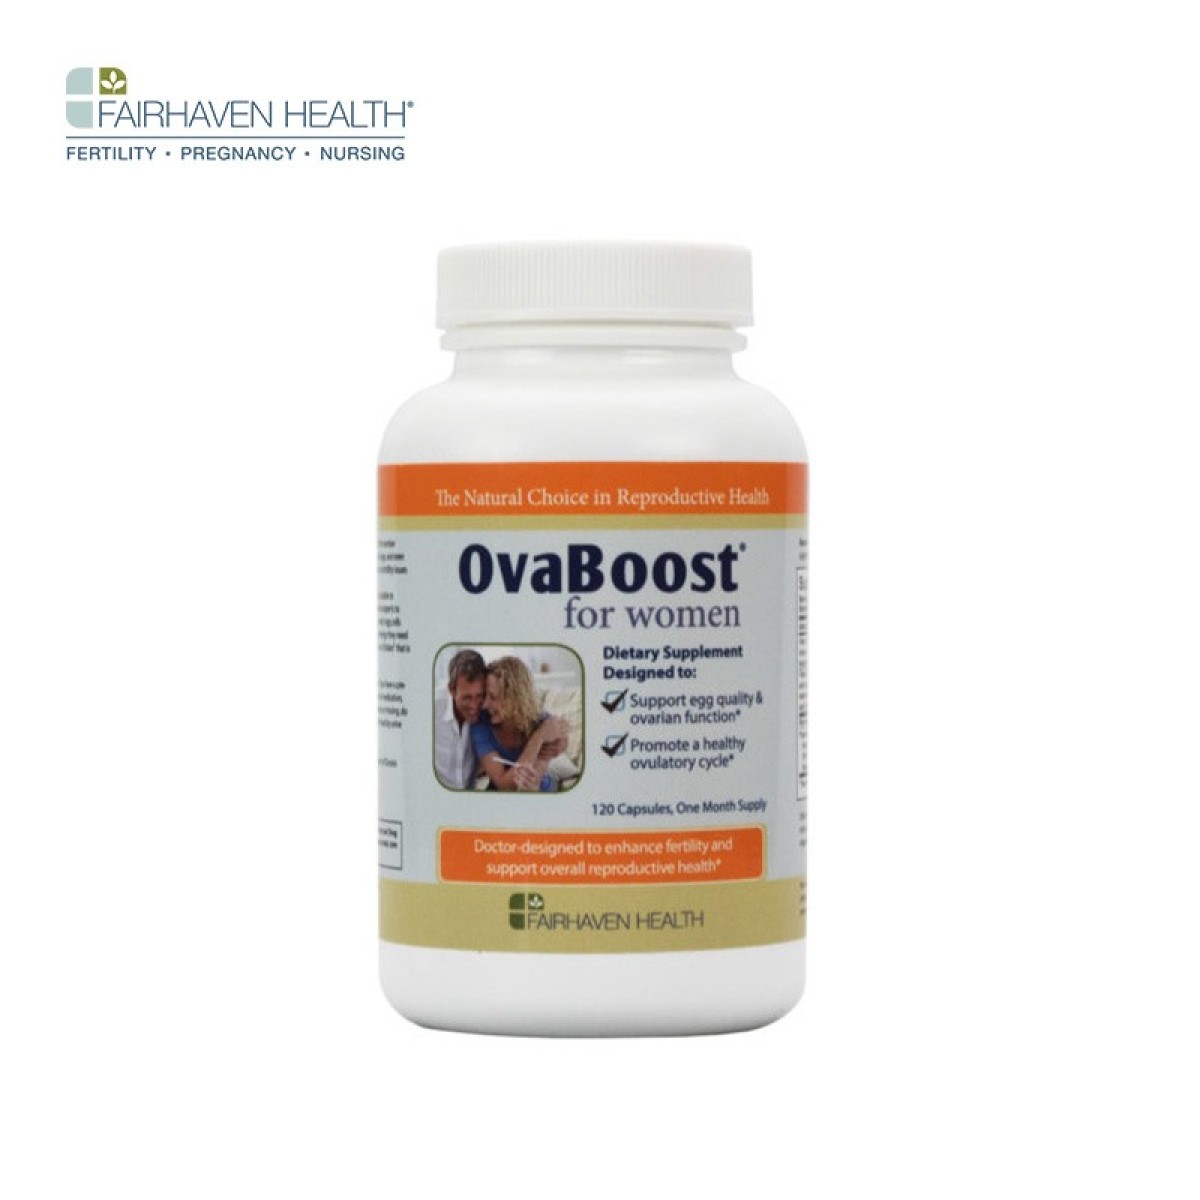 Fairhaven Health 生育補充劑 - OvaBoost for Women 卵子加營 (120粒) OvaBoost for Egg Quality